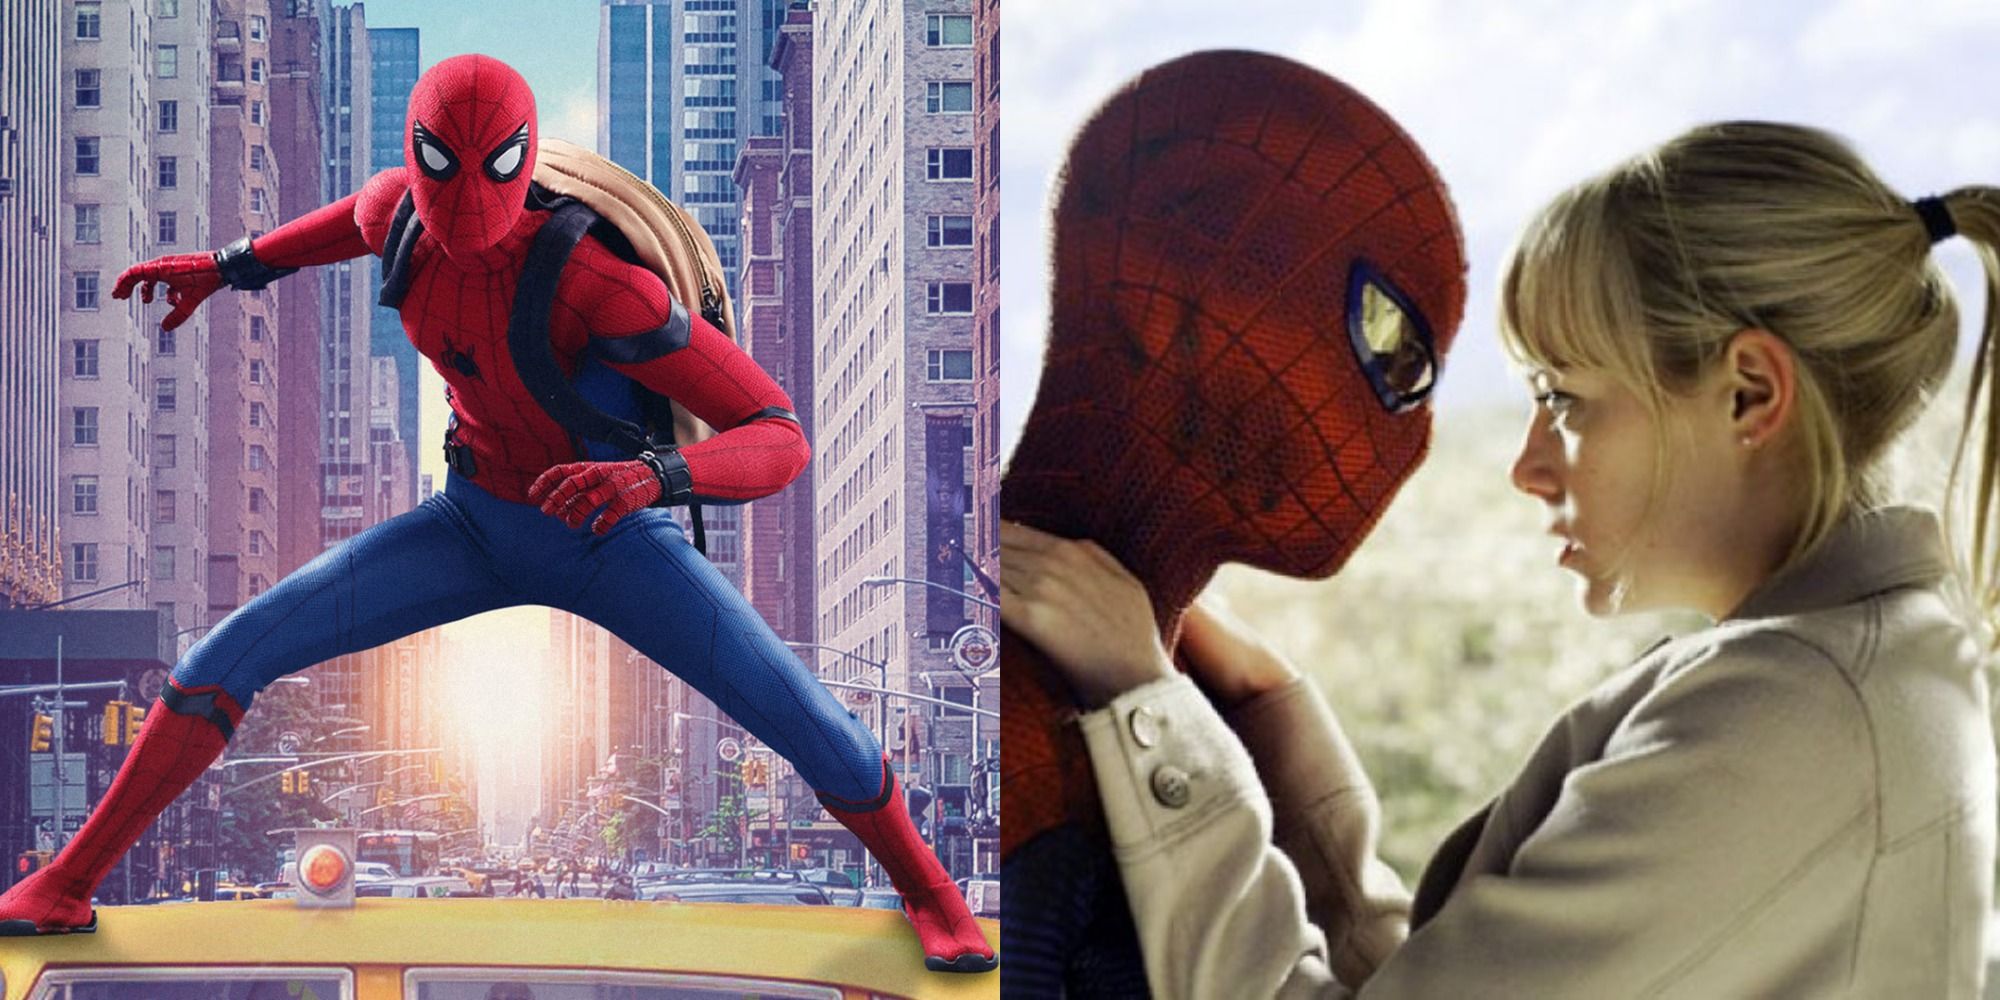 A split image of Spiderman standing on a car and hugging Gwen Stacy in the Spider-Man movies